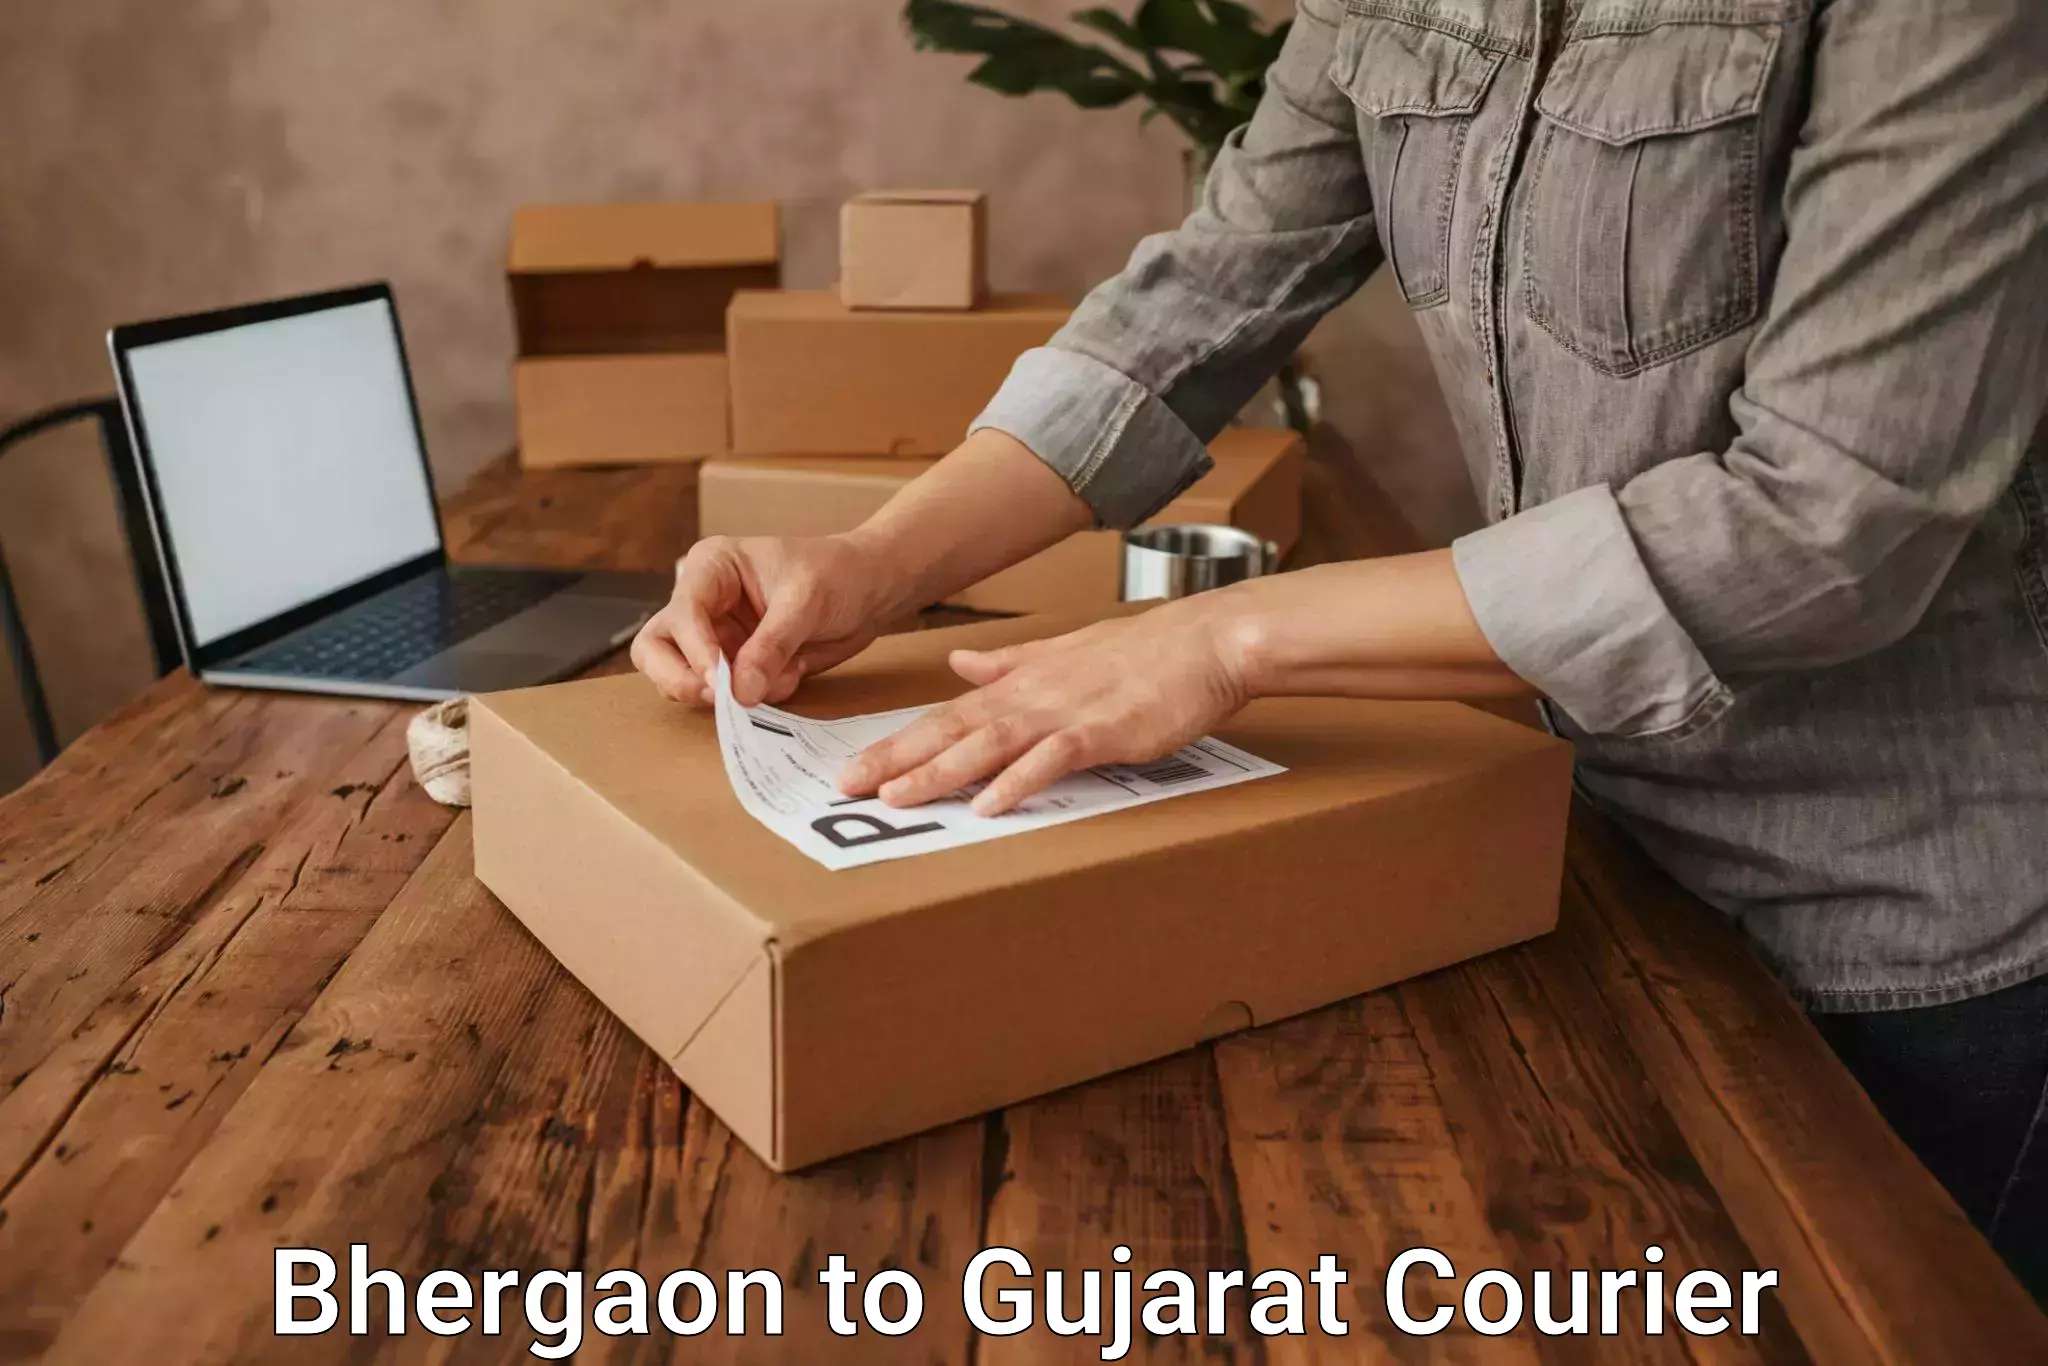 Courier service innovation in Bhergaon to Ahmedabad